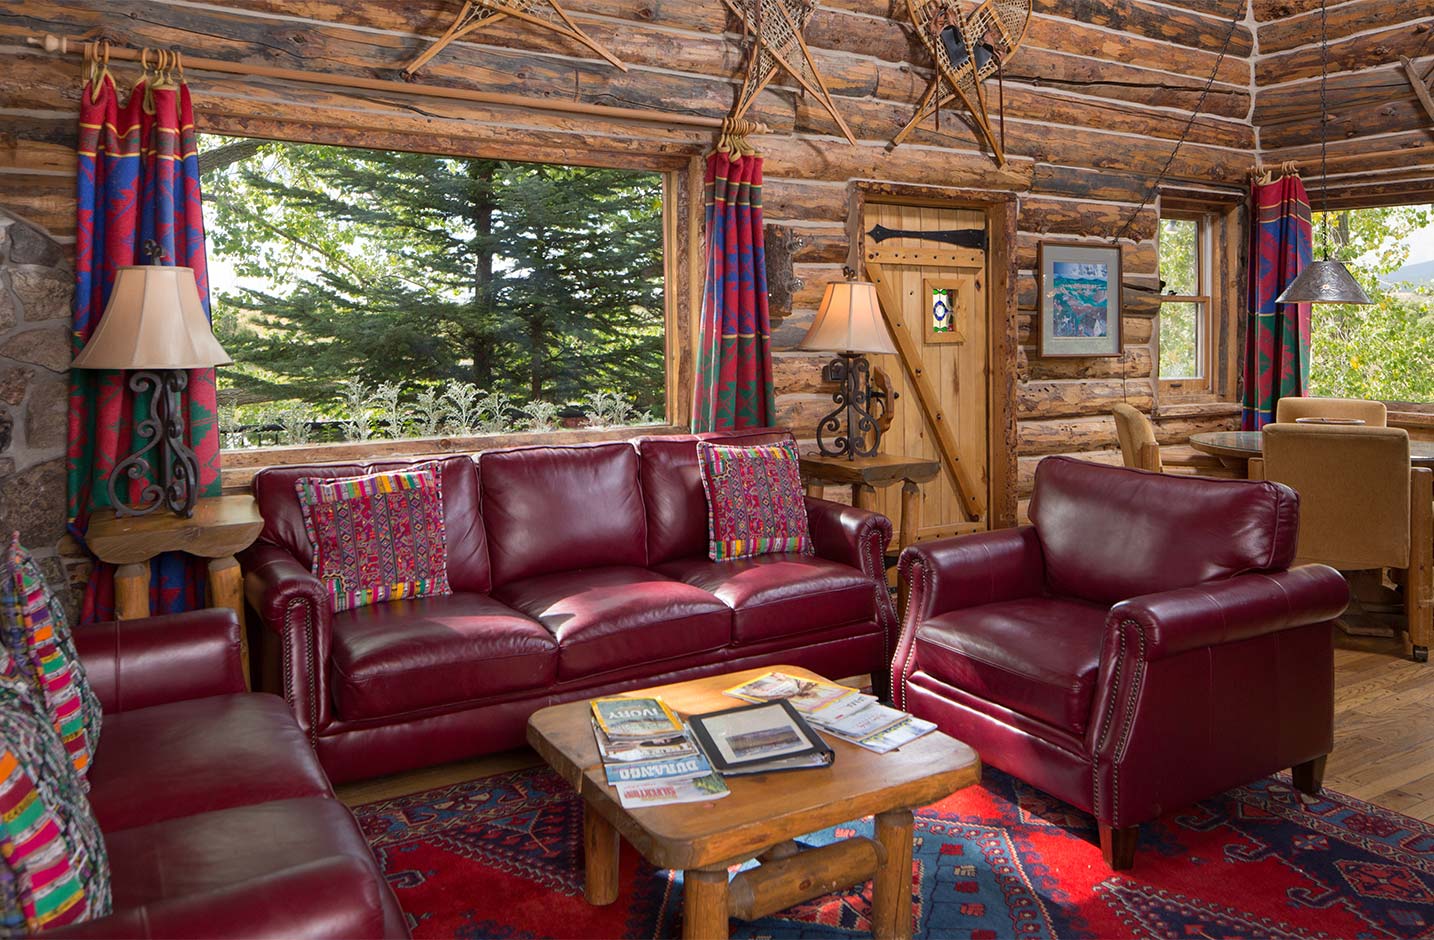 Living room in a log cabin with red leather couches and large windows